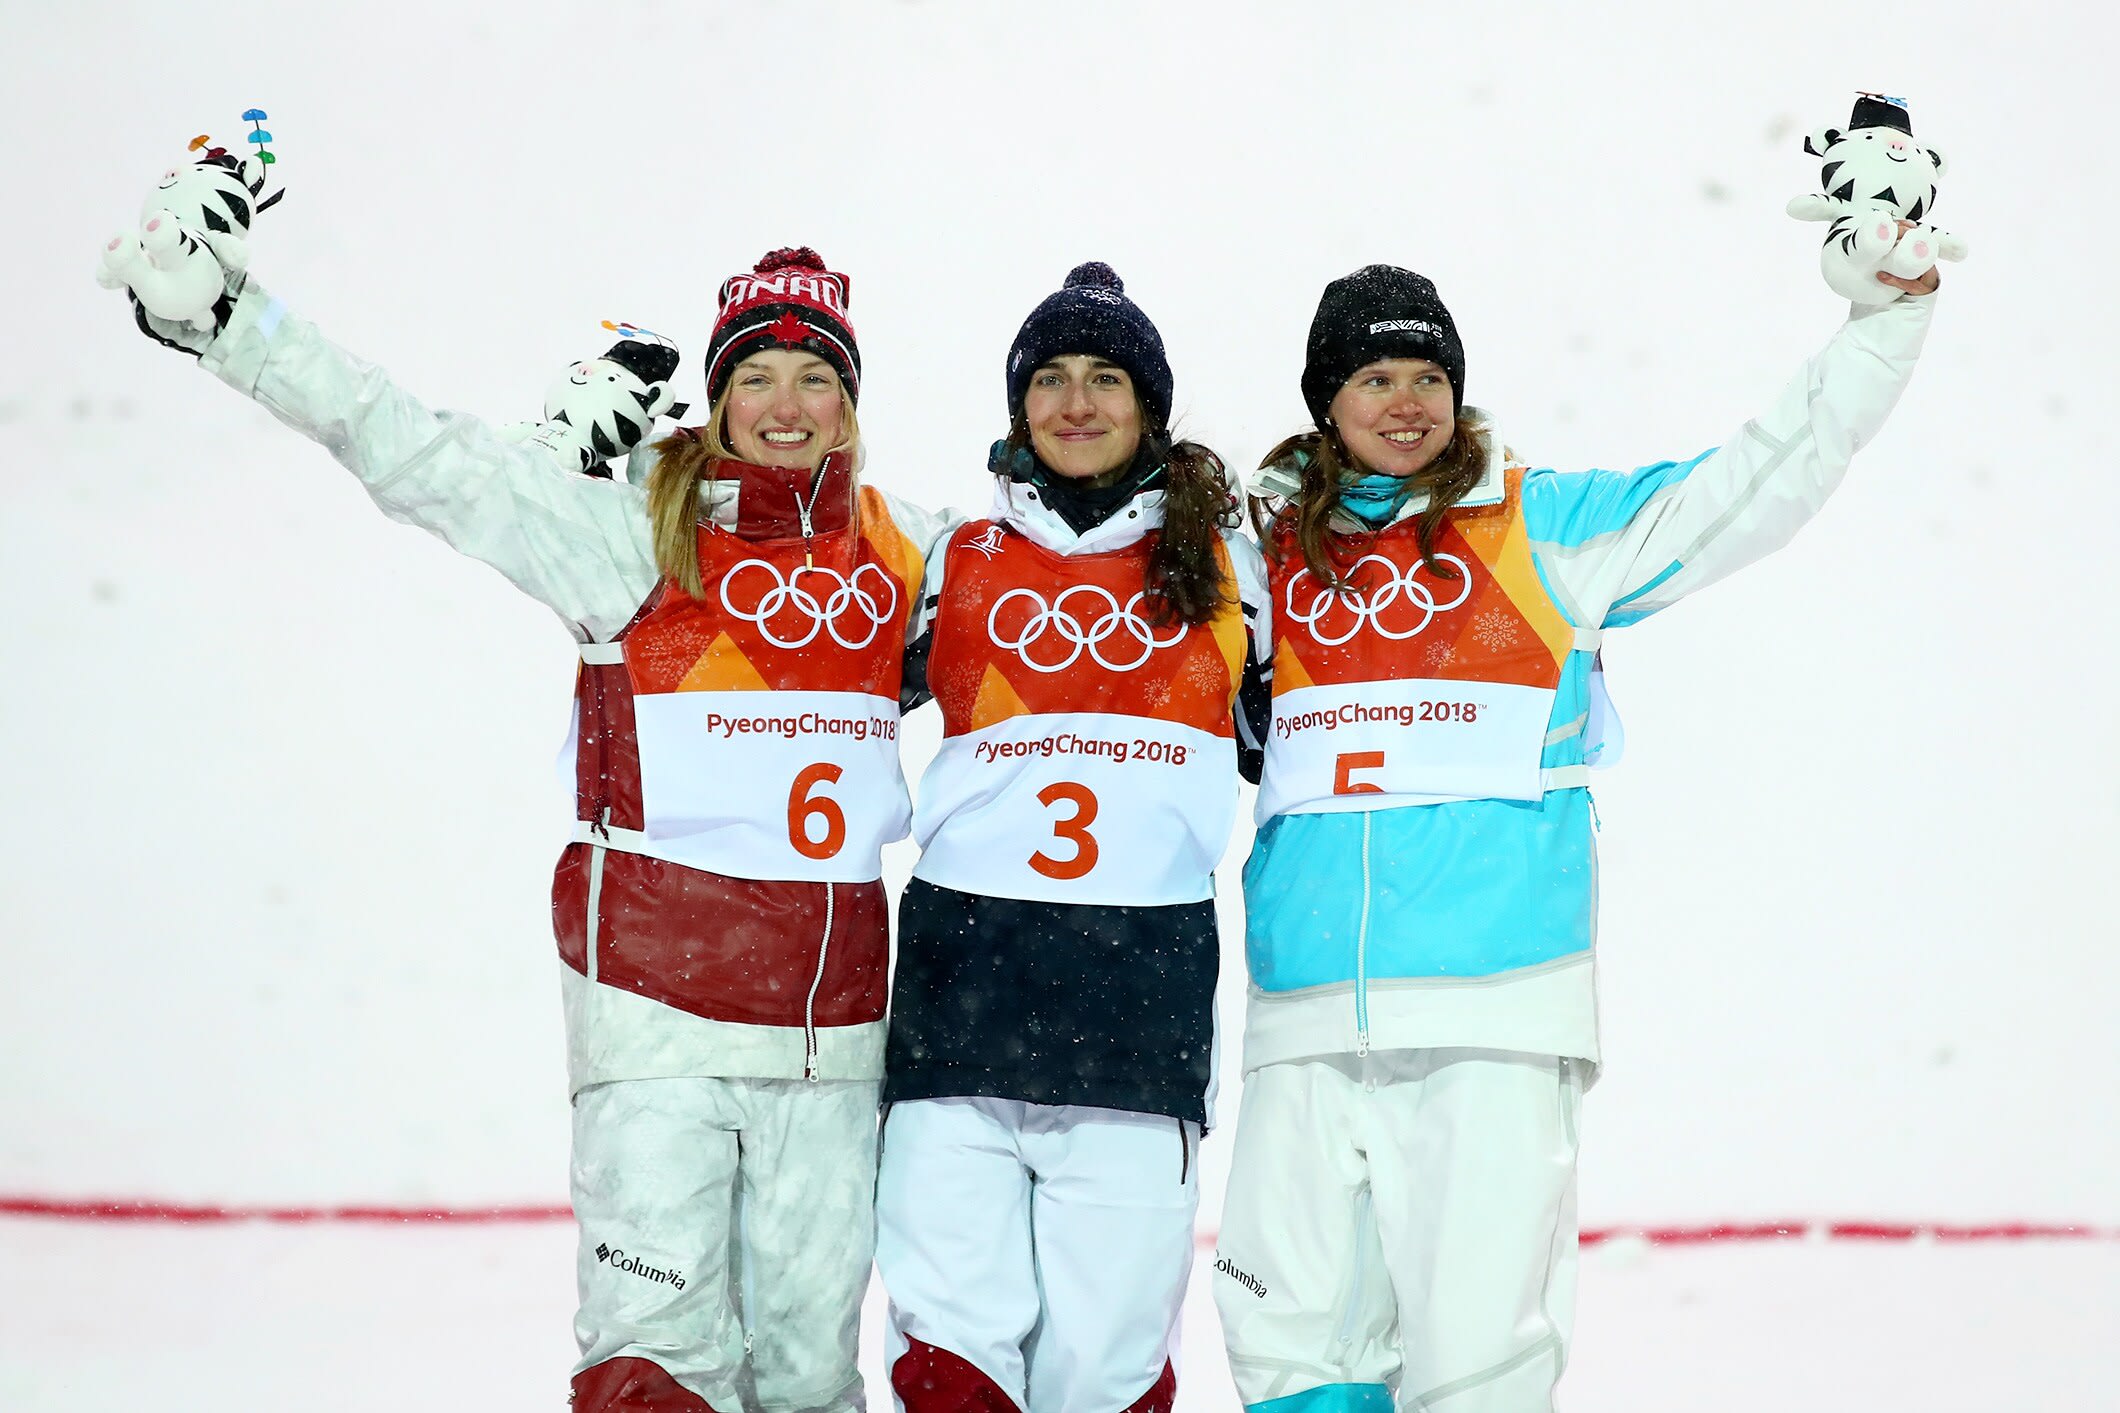 (L-R) Justine Dufour-Lapointe of Canada , Perrine Laffont of France and Yulia Galysheva of Kazakhstan (Getty Images)